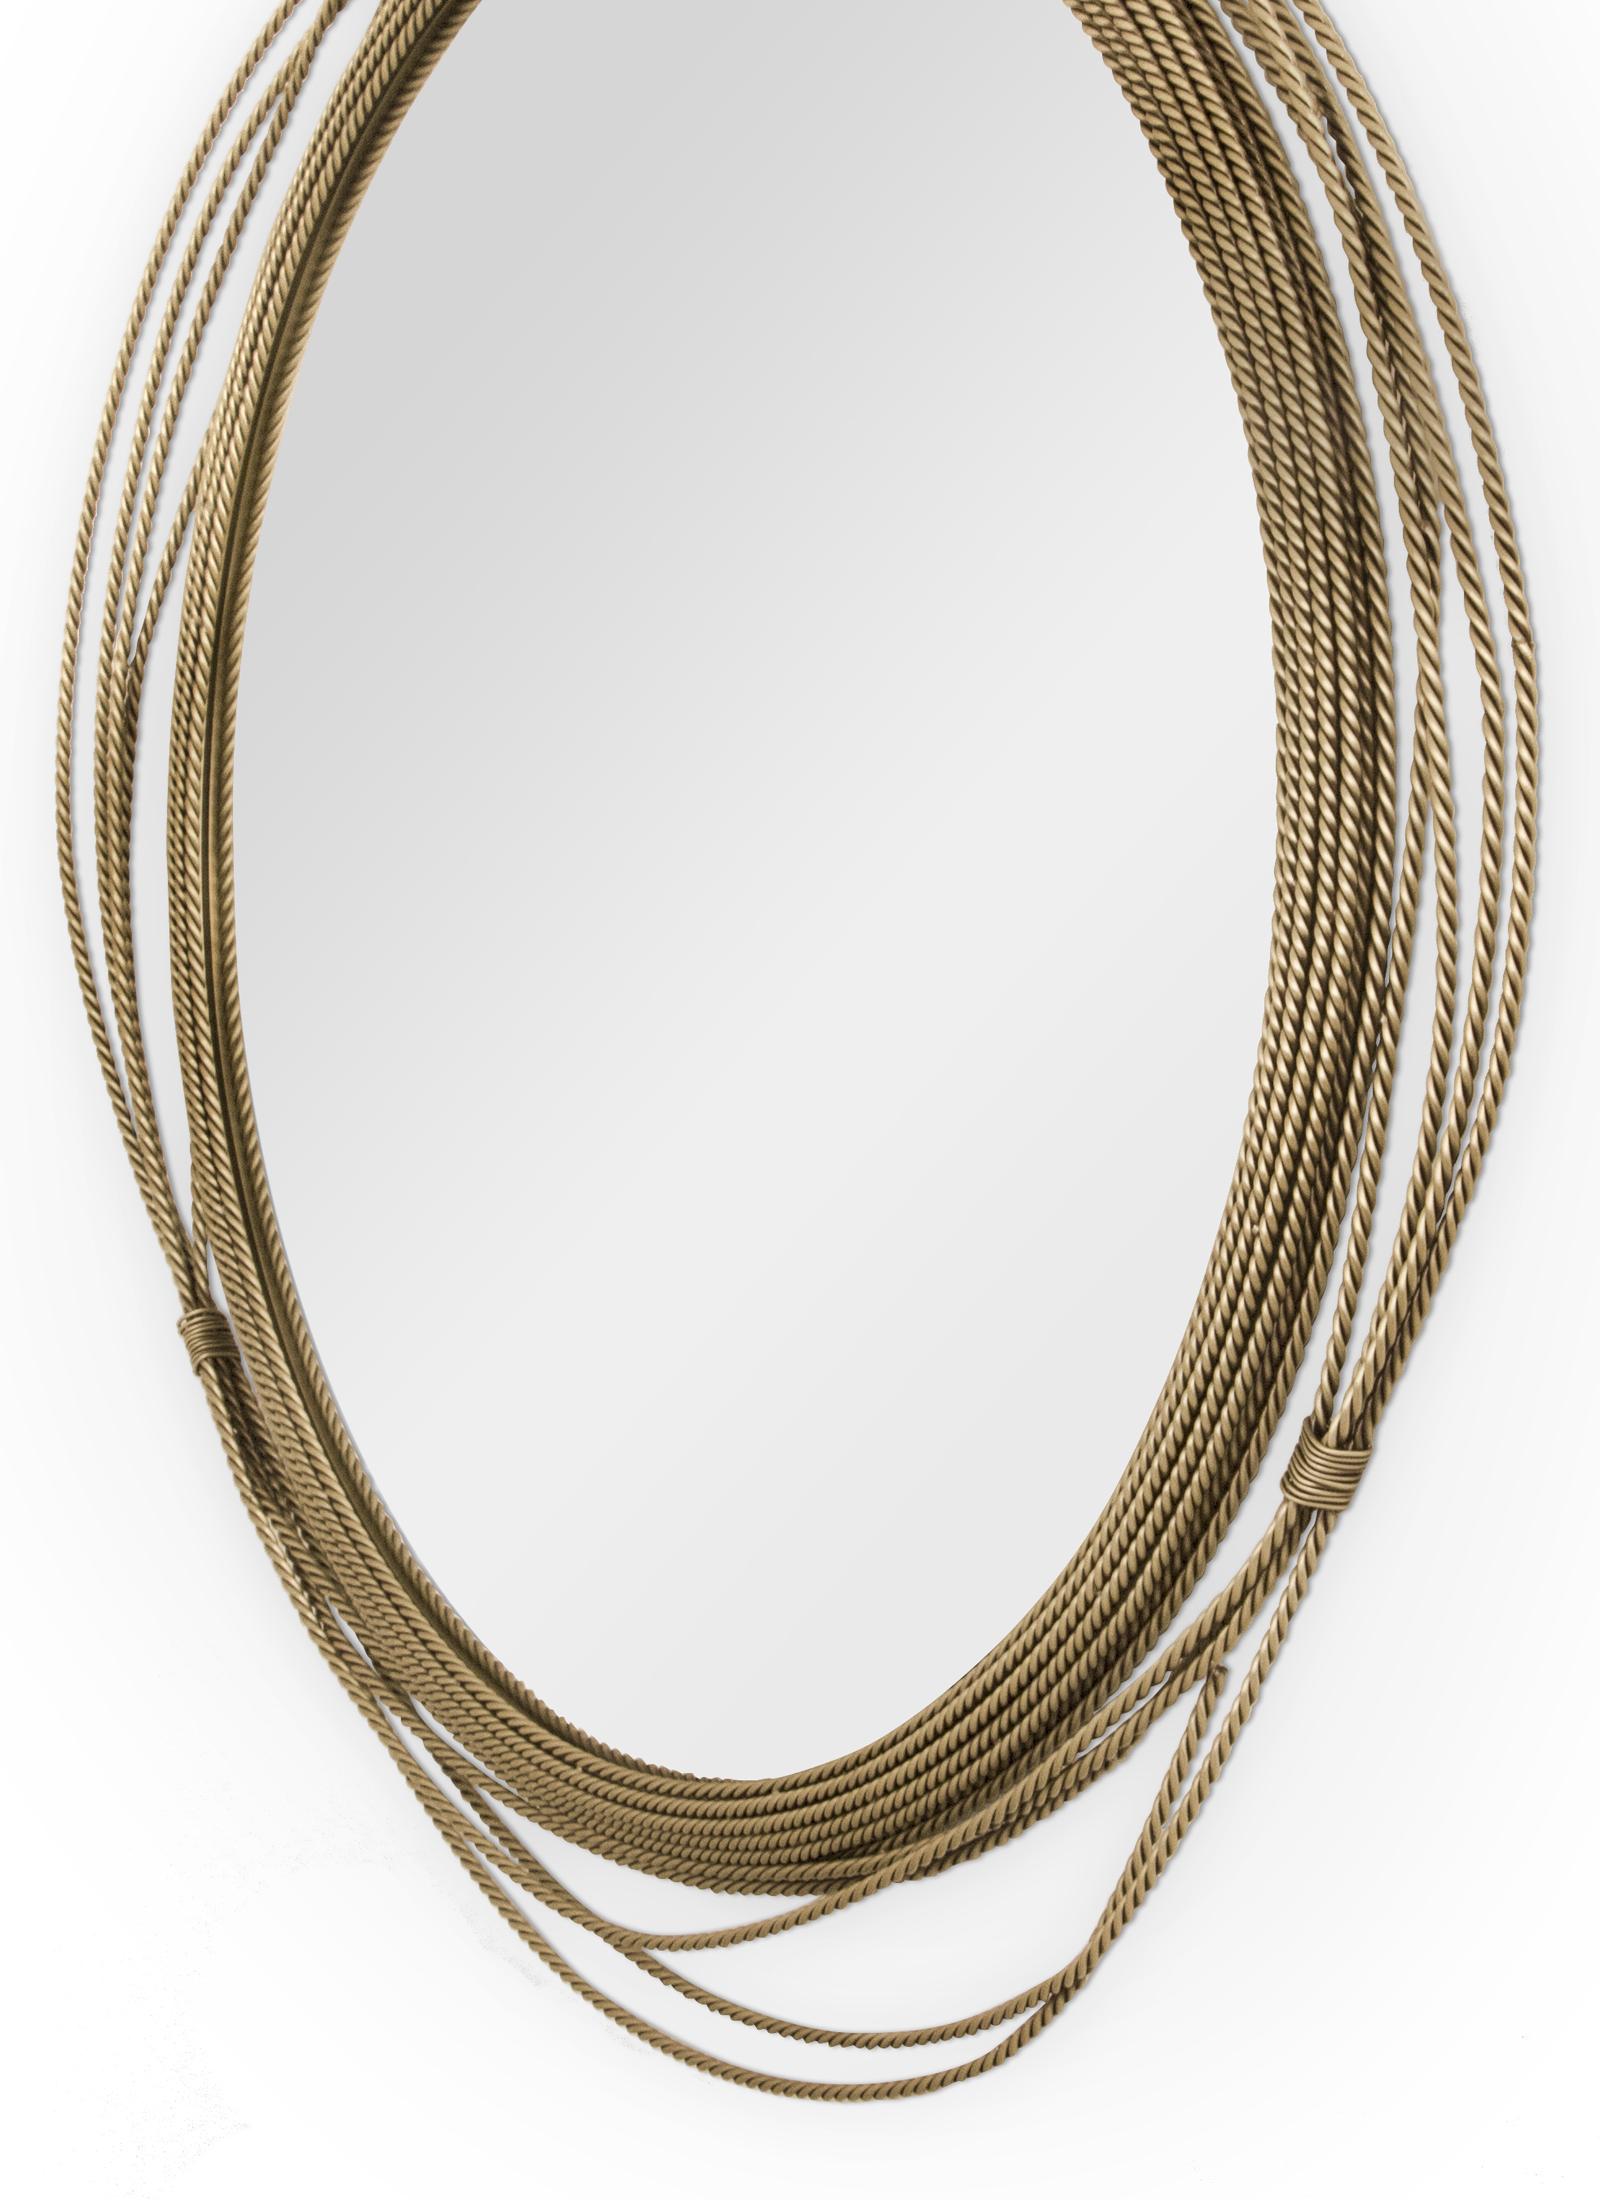 Portuguese Brass Knot Round Mirror For Sale